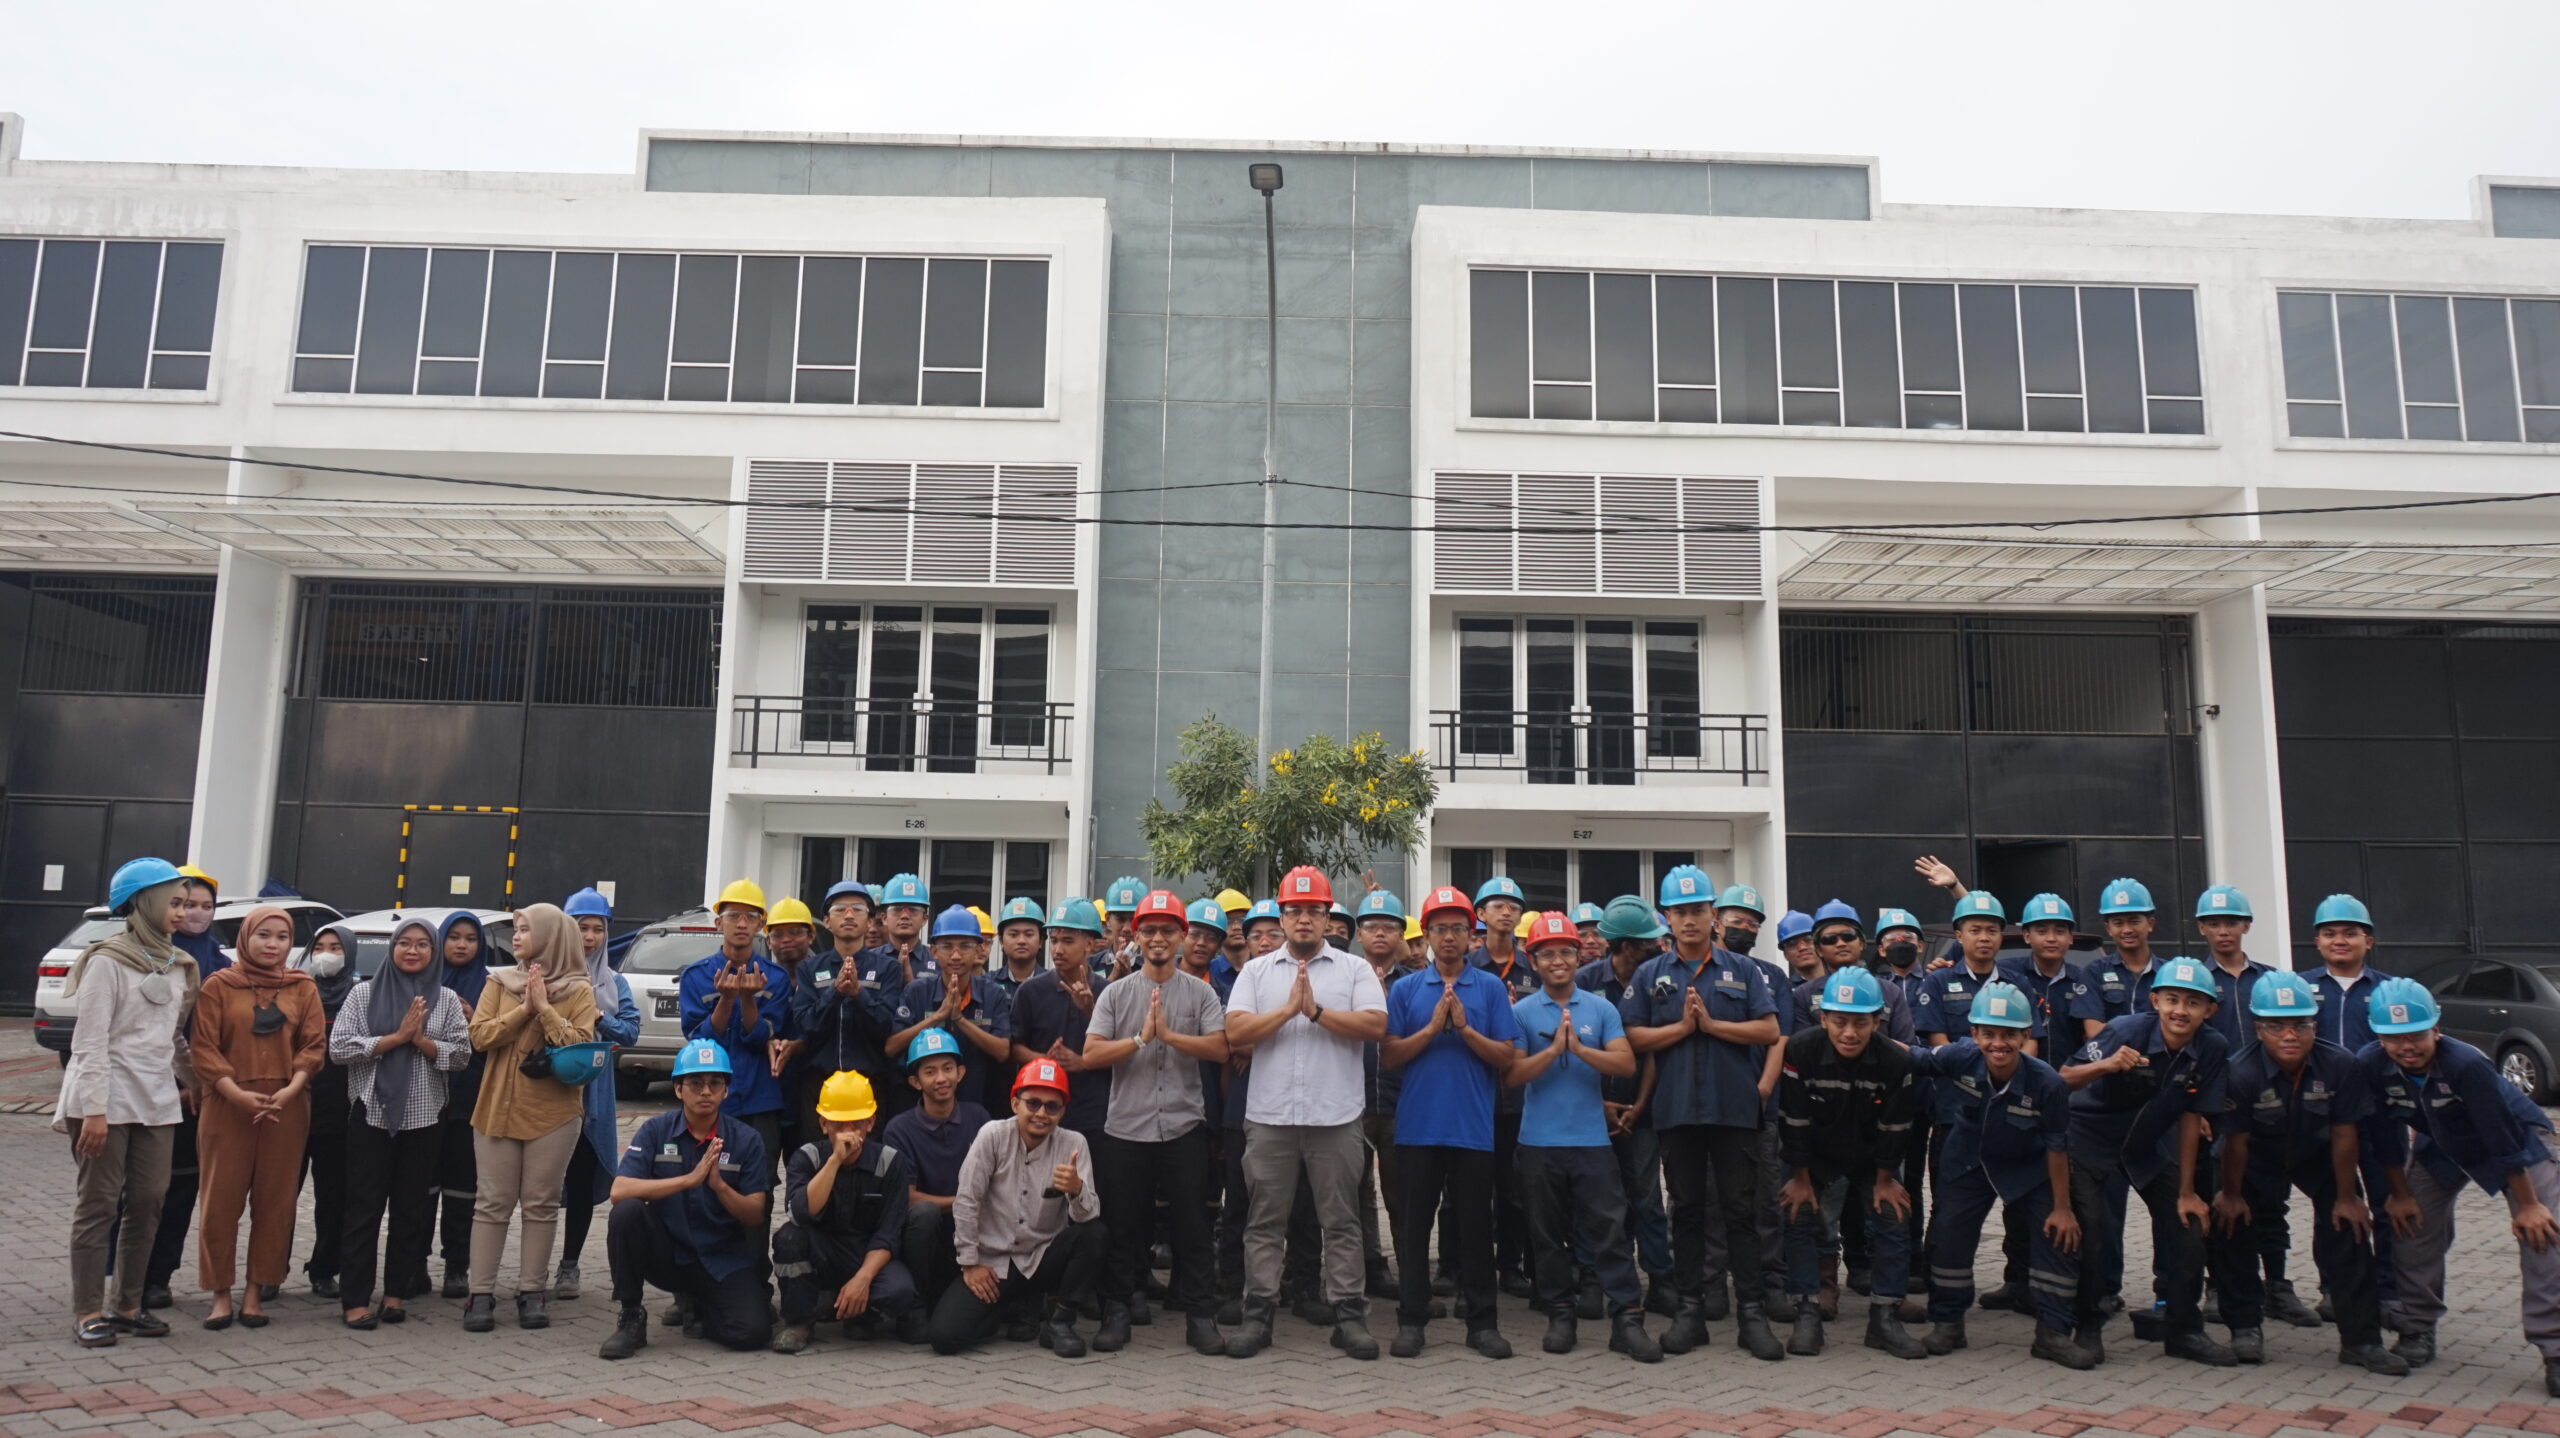 SSC Works Blog  Surabaya Branch Welcomes Eid al-Fitr 1445H with Congratulations DSC06965 scaled ssc works SSC WORKS DSC06965 scaled